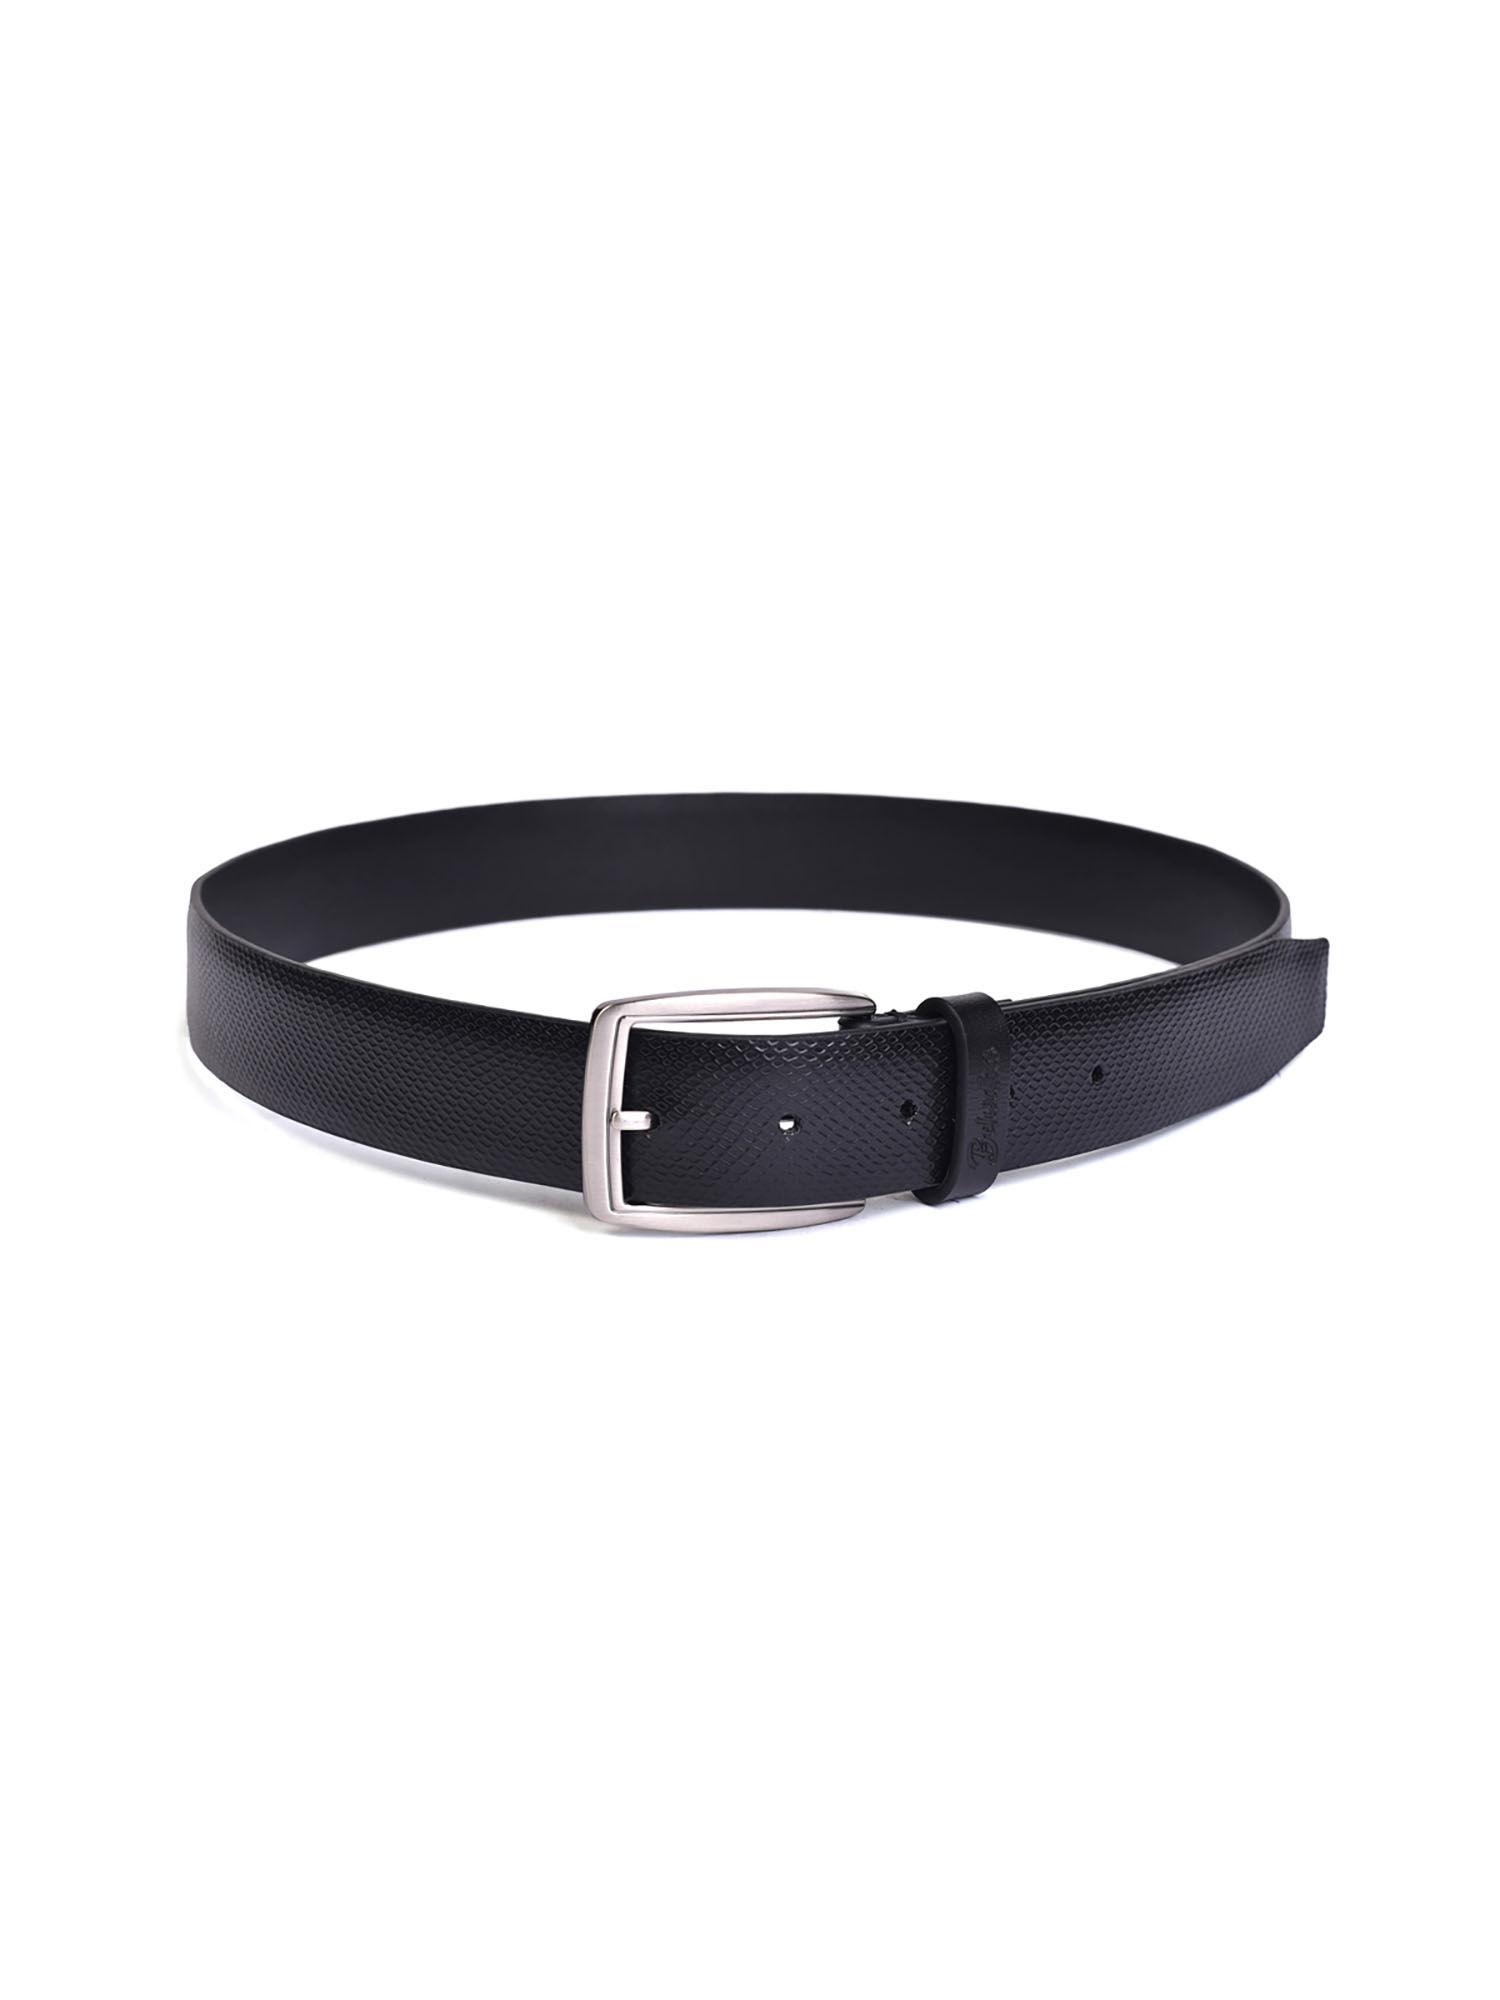 genuine leather black mens belt with nickle finished buckle